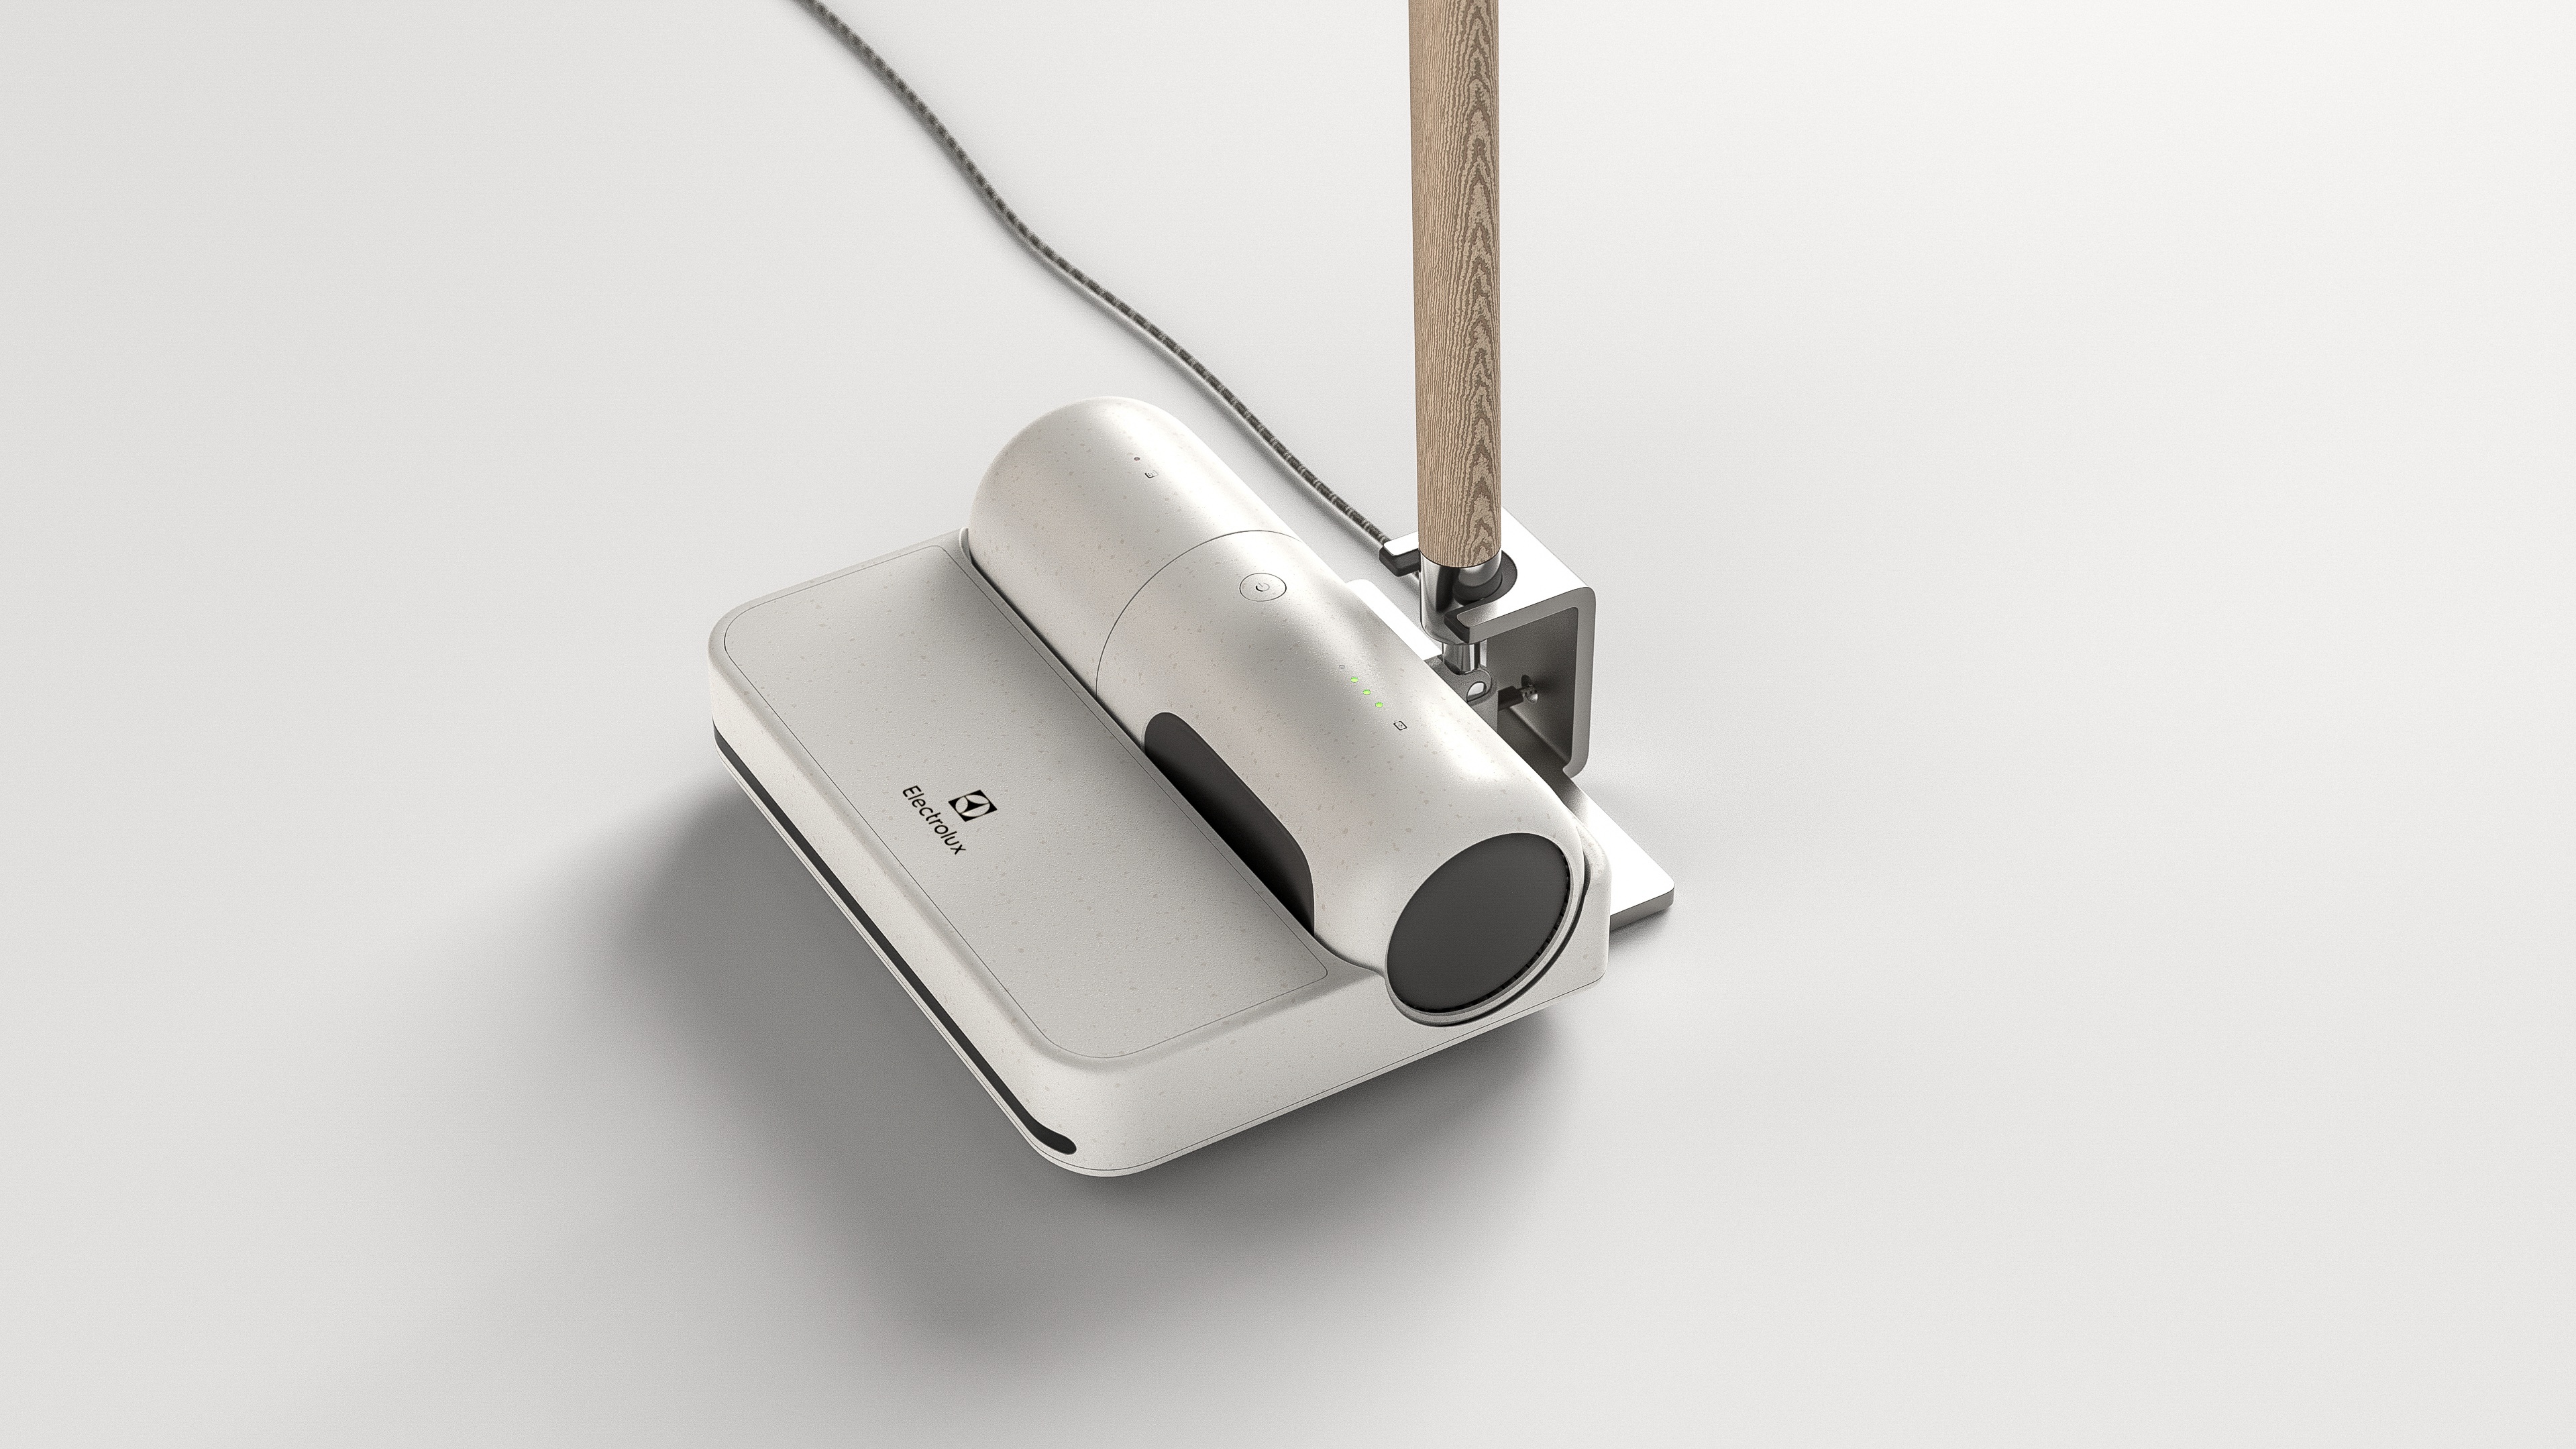 TRIO - A three-in-one dust cleaning device